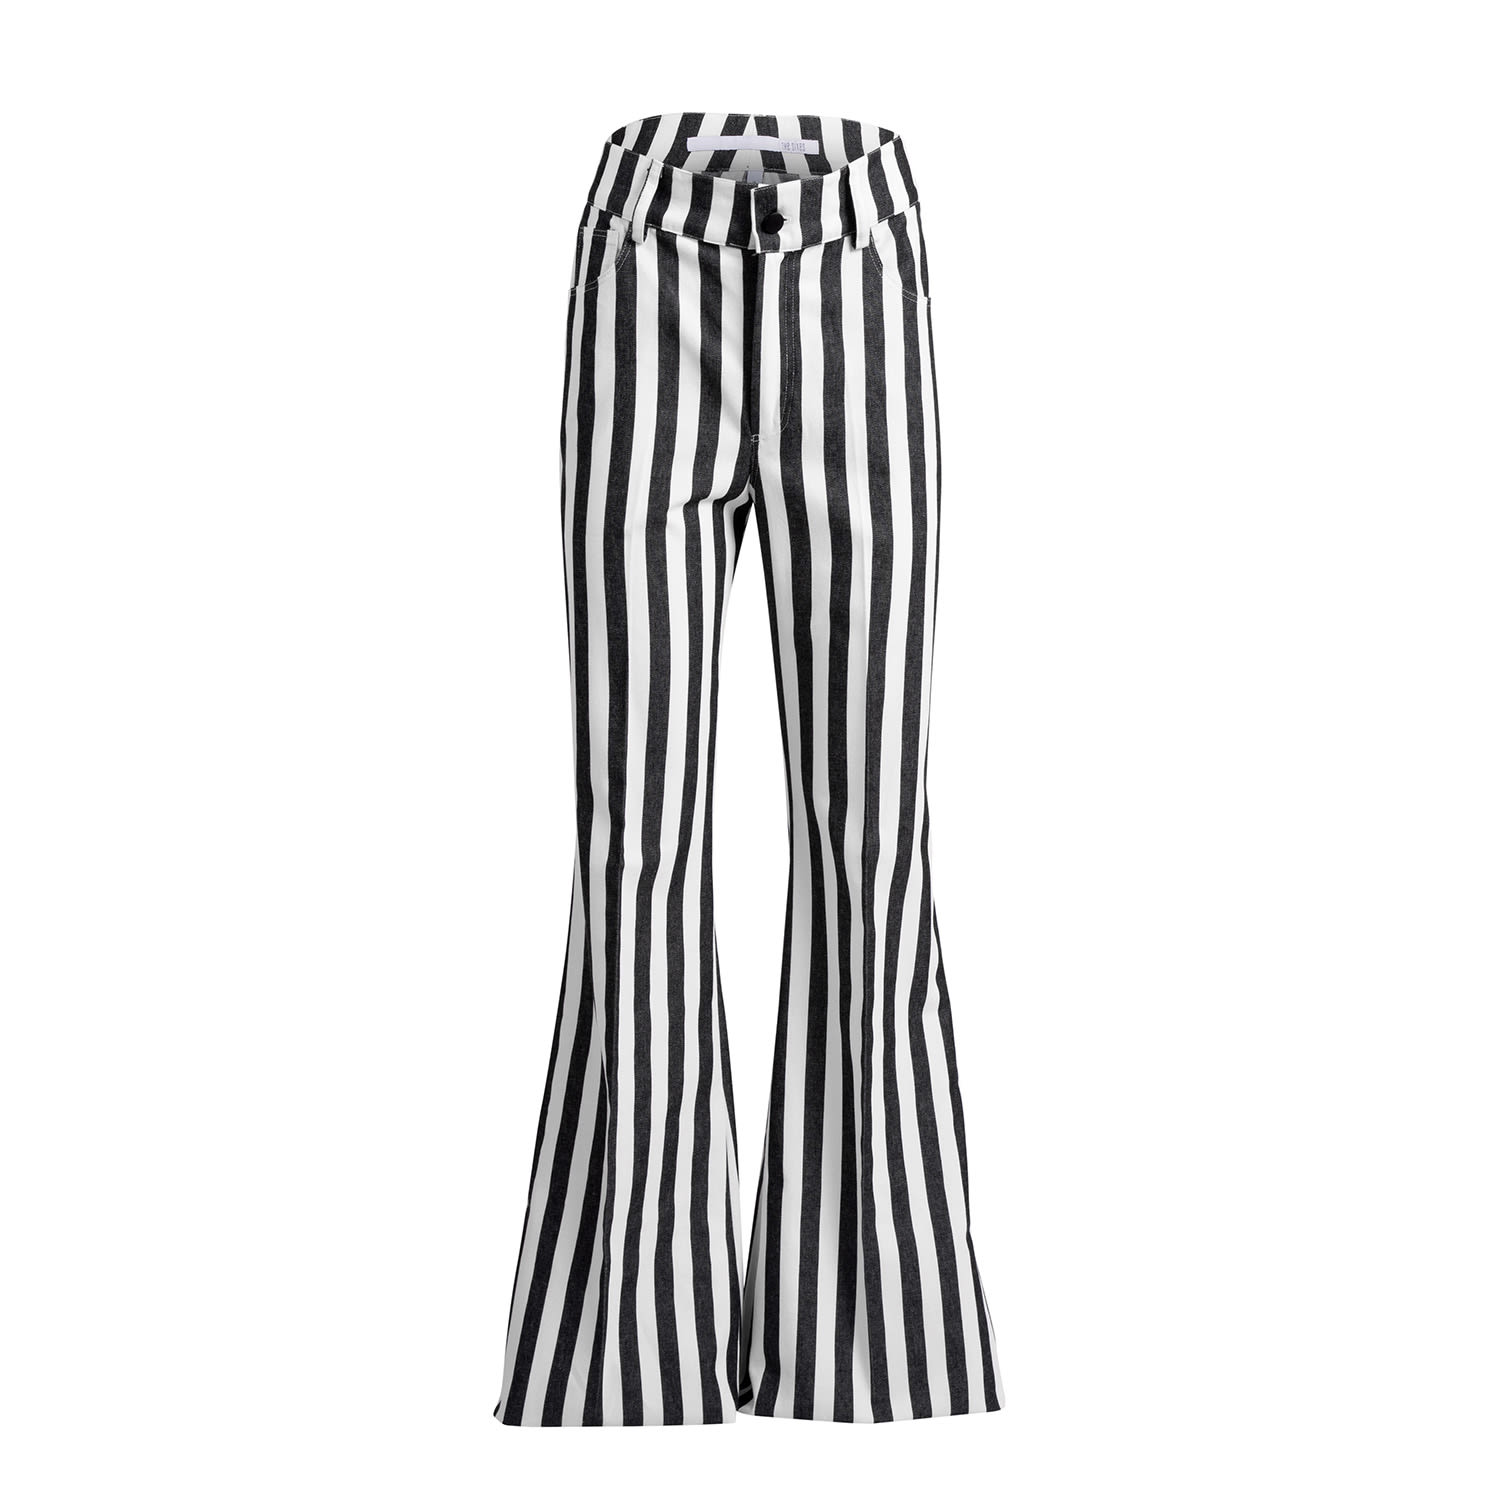 Black / White Claire Pant - Black & White Striped Flare Denim Extra Small The Sixes